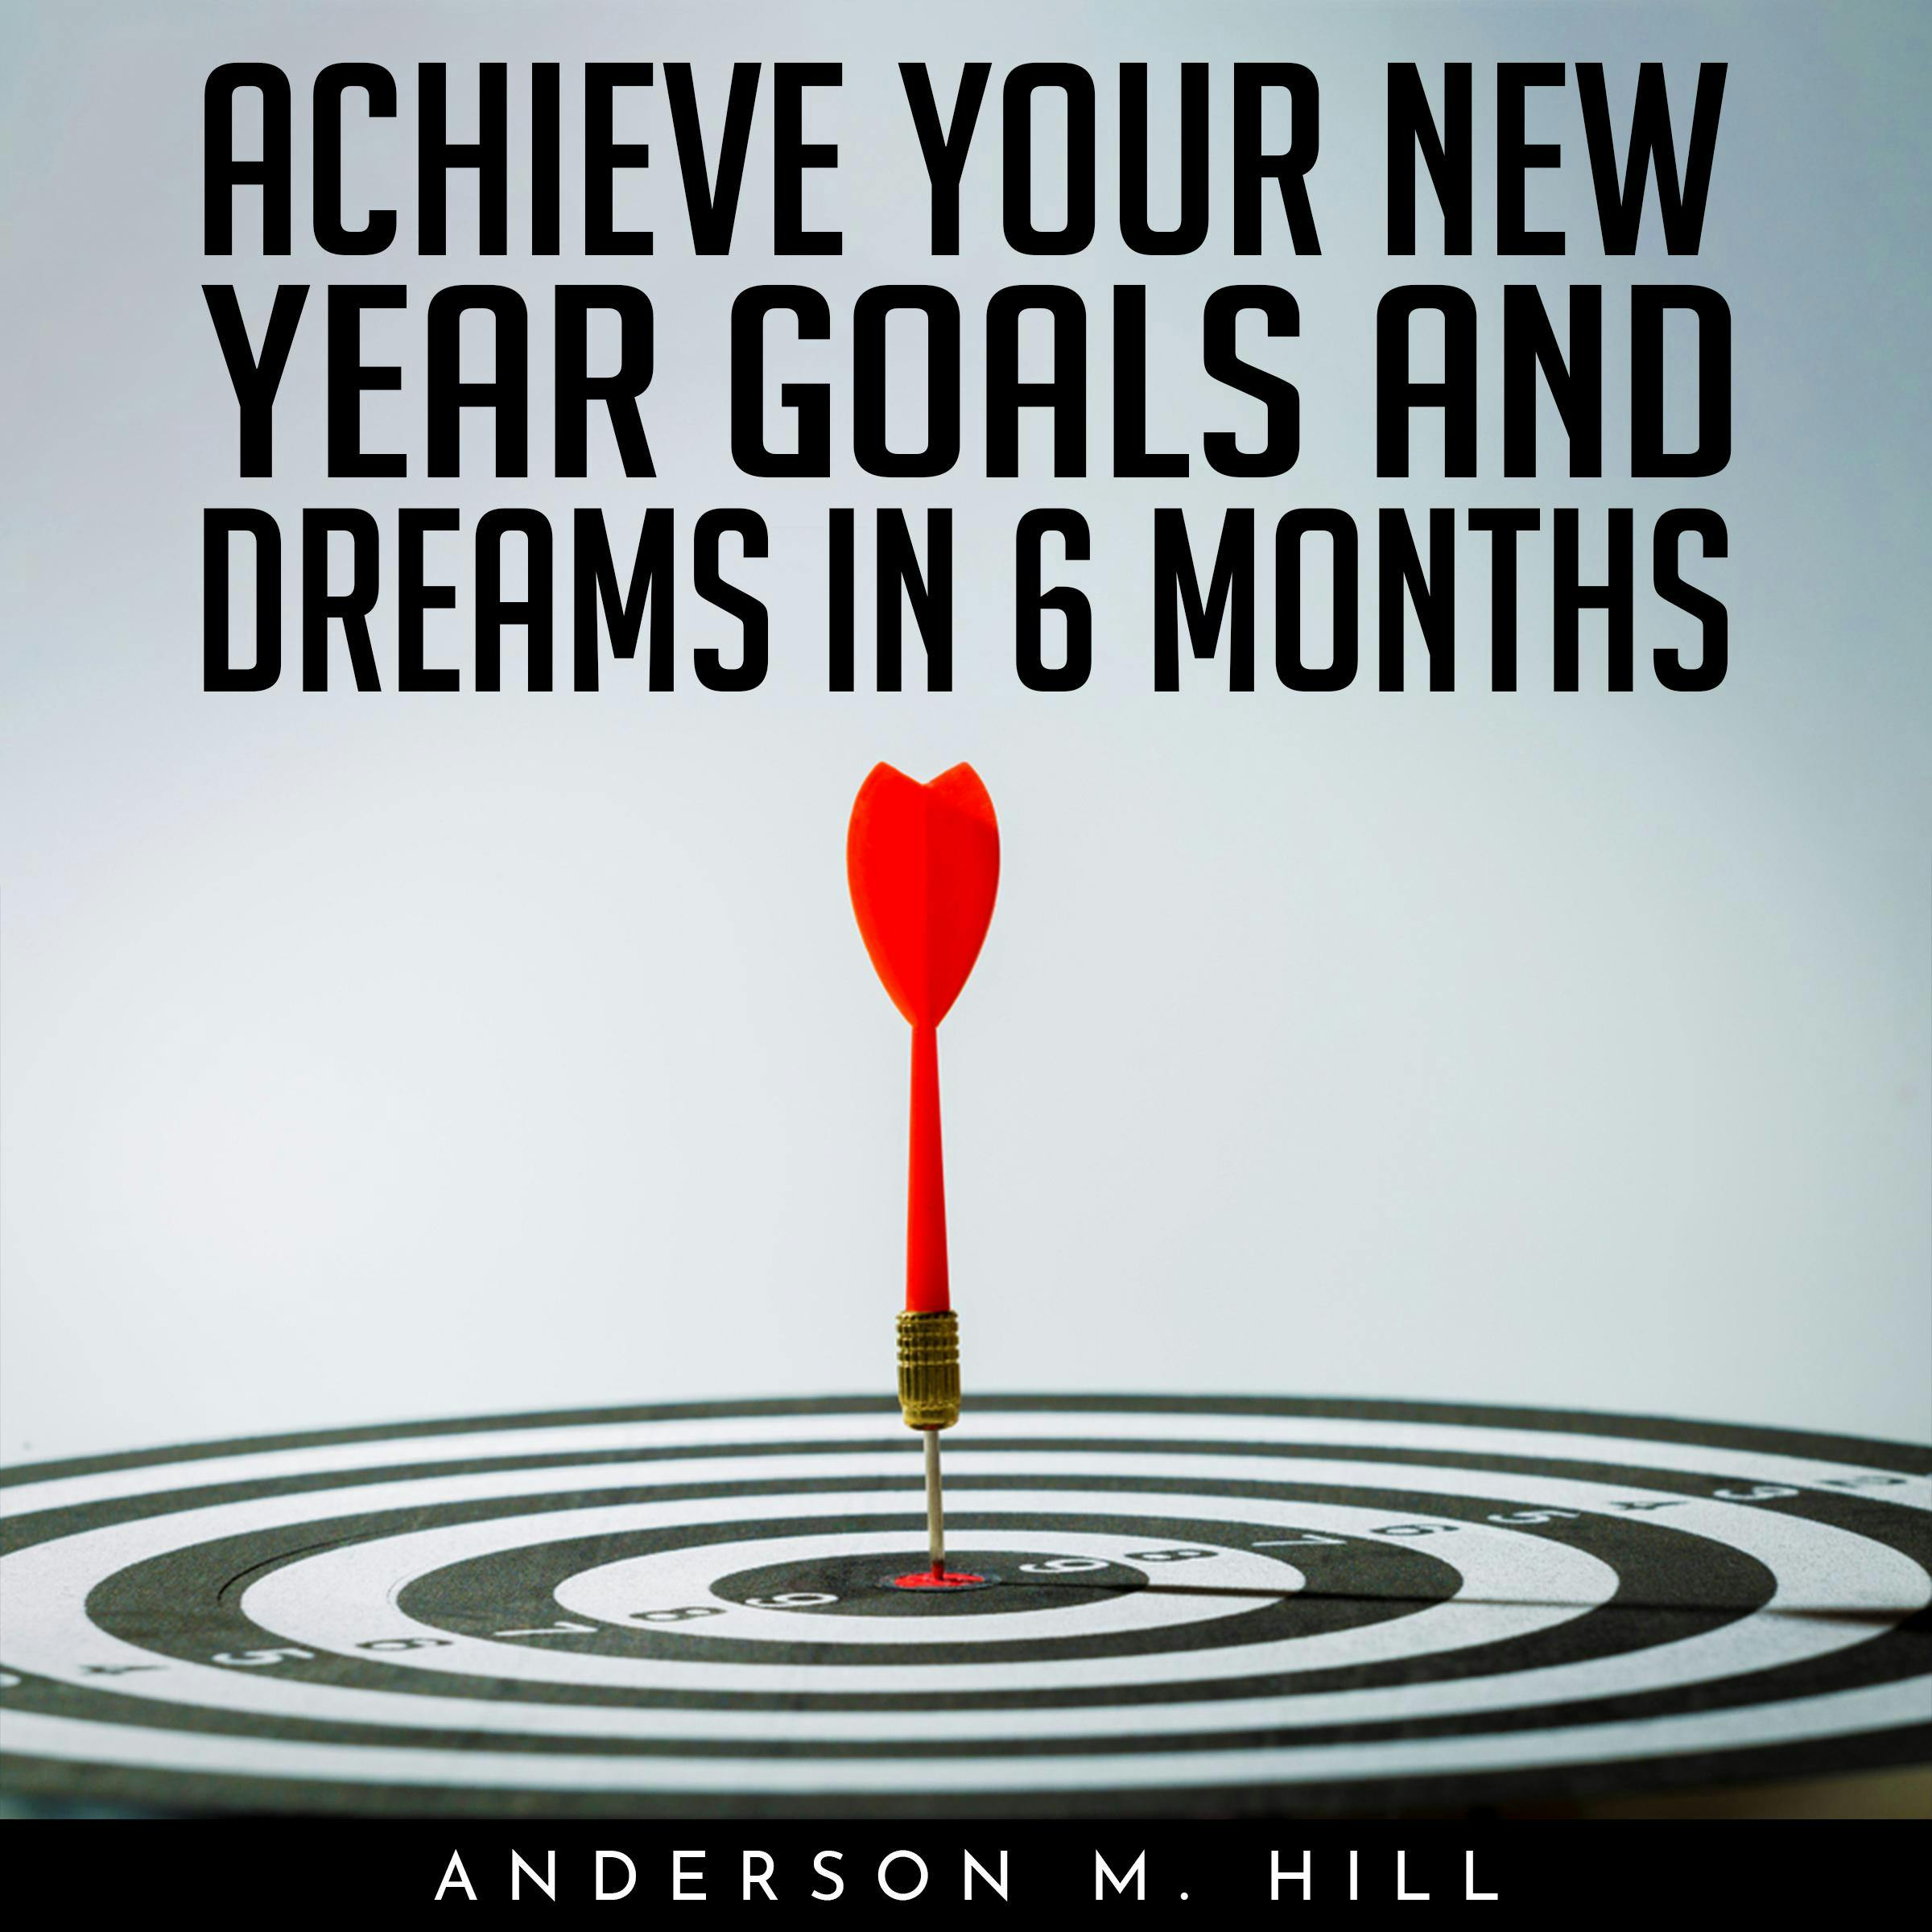 ACHIEVE YOUR NEW YEAR GOALS AND DREAMS IN 6 MONTHS - Anderson M. Hill